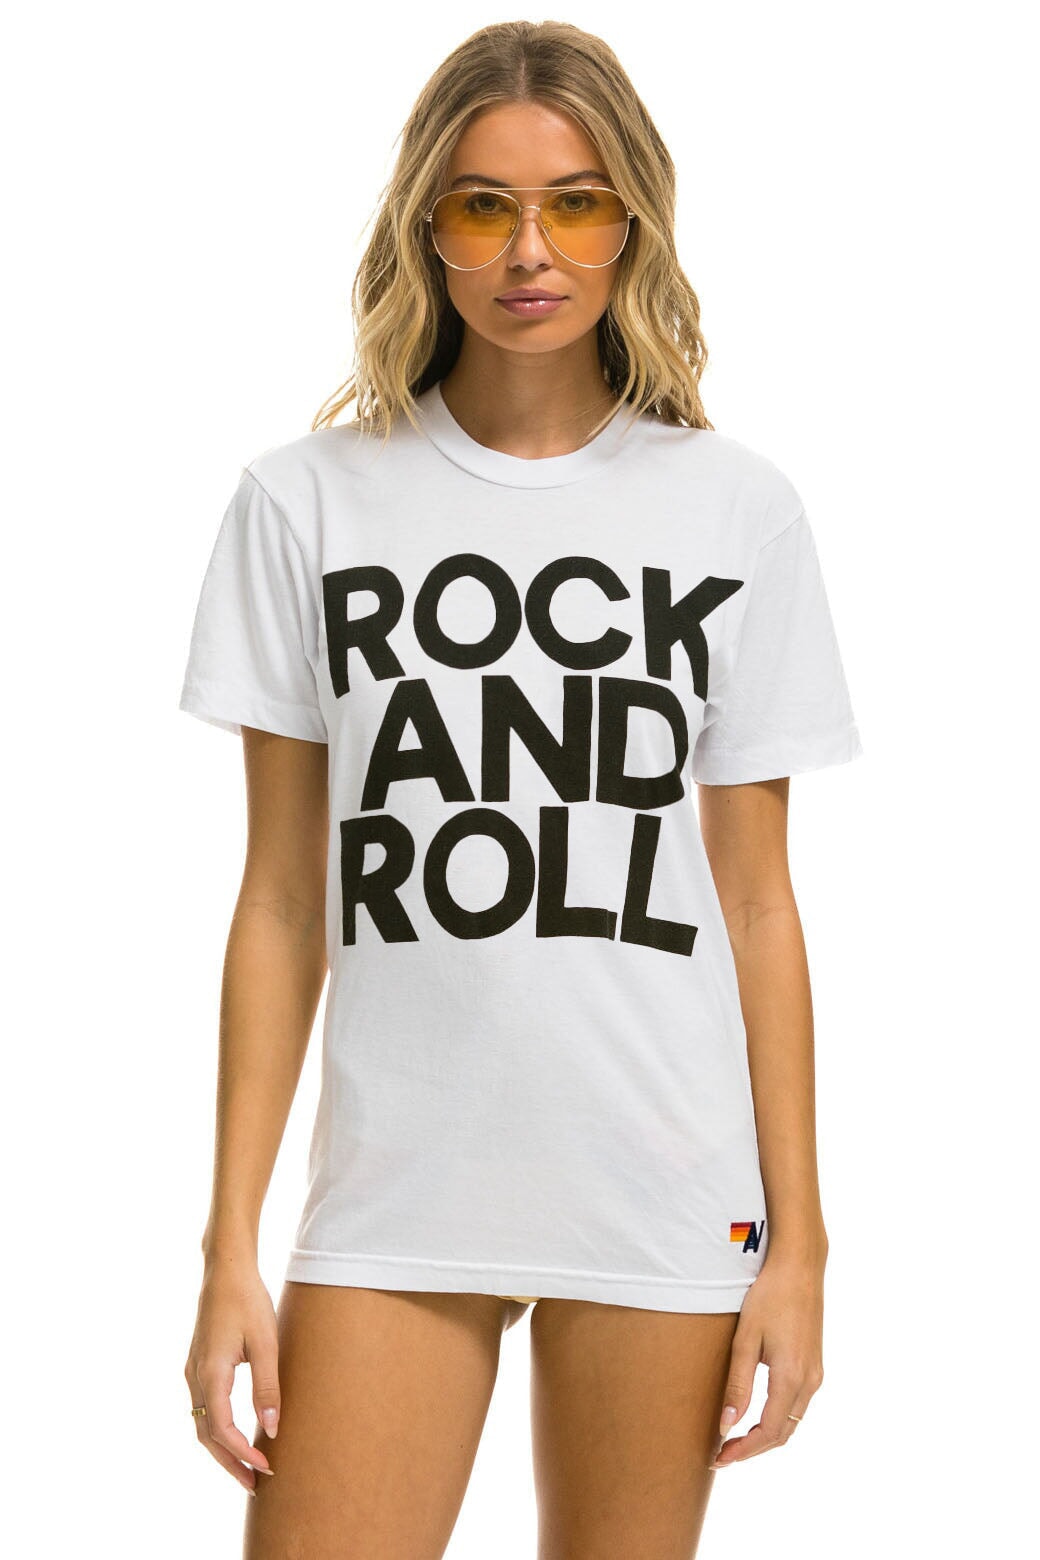 ROCK AND ROLL TEE - WHITE Tees Aviator Nation 